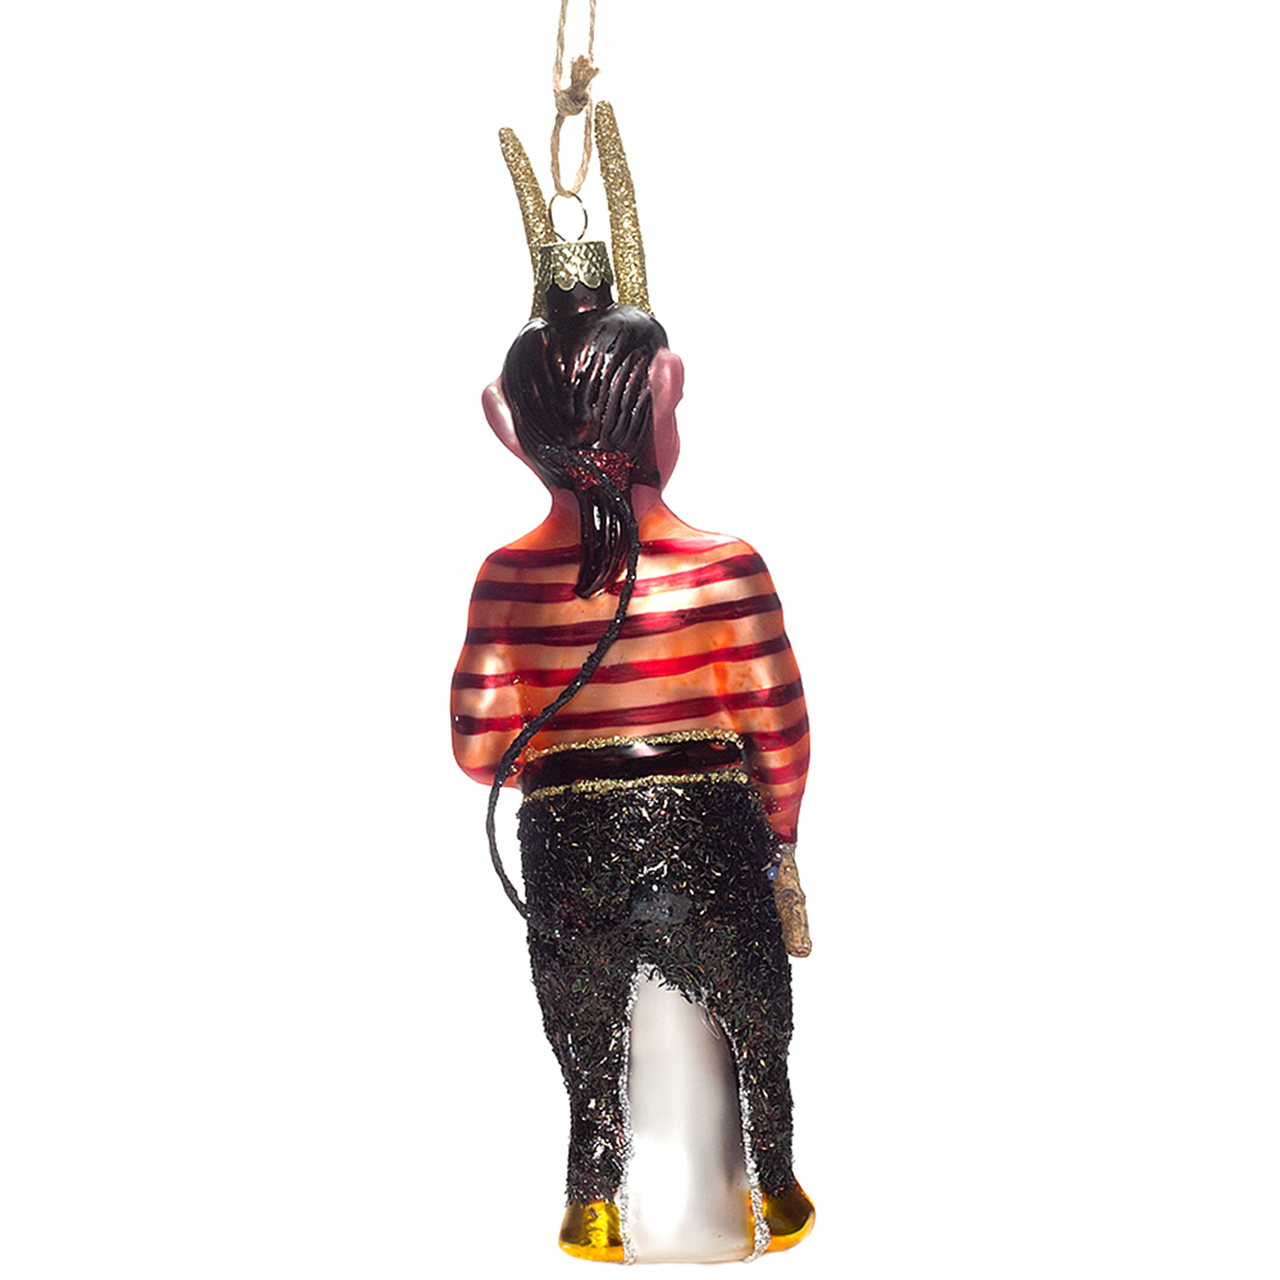 YOUNG KRAMPUS GLASS XMAS ORNAMENT